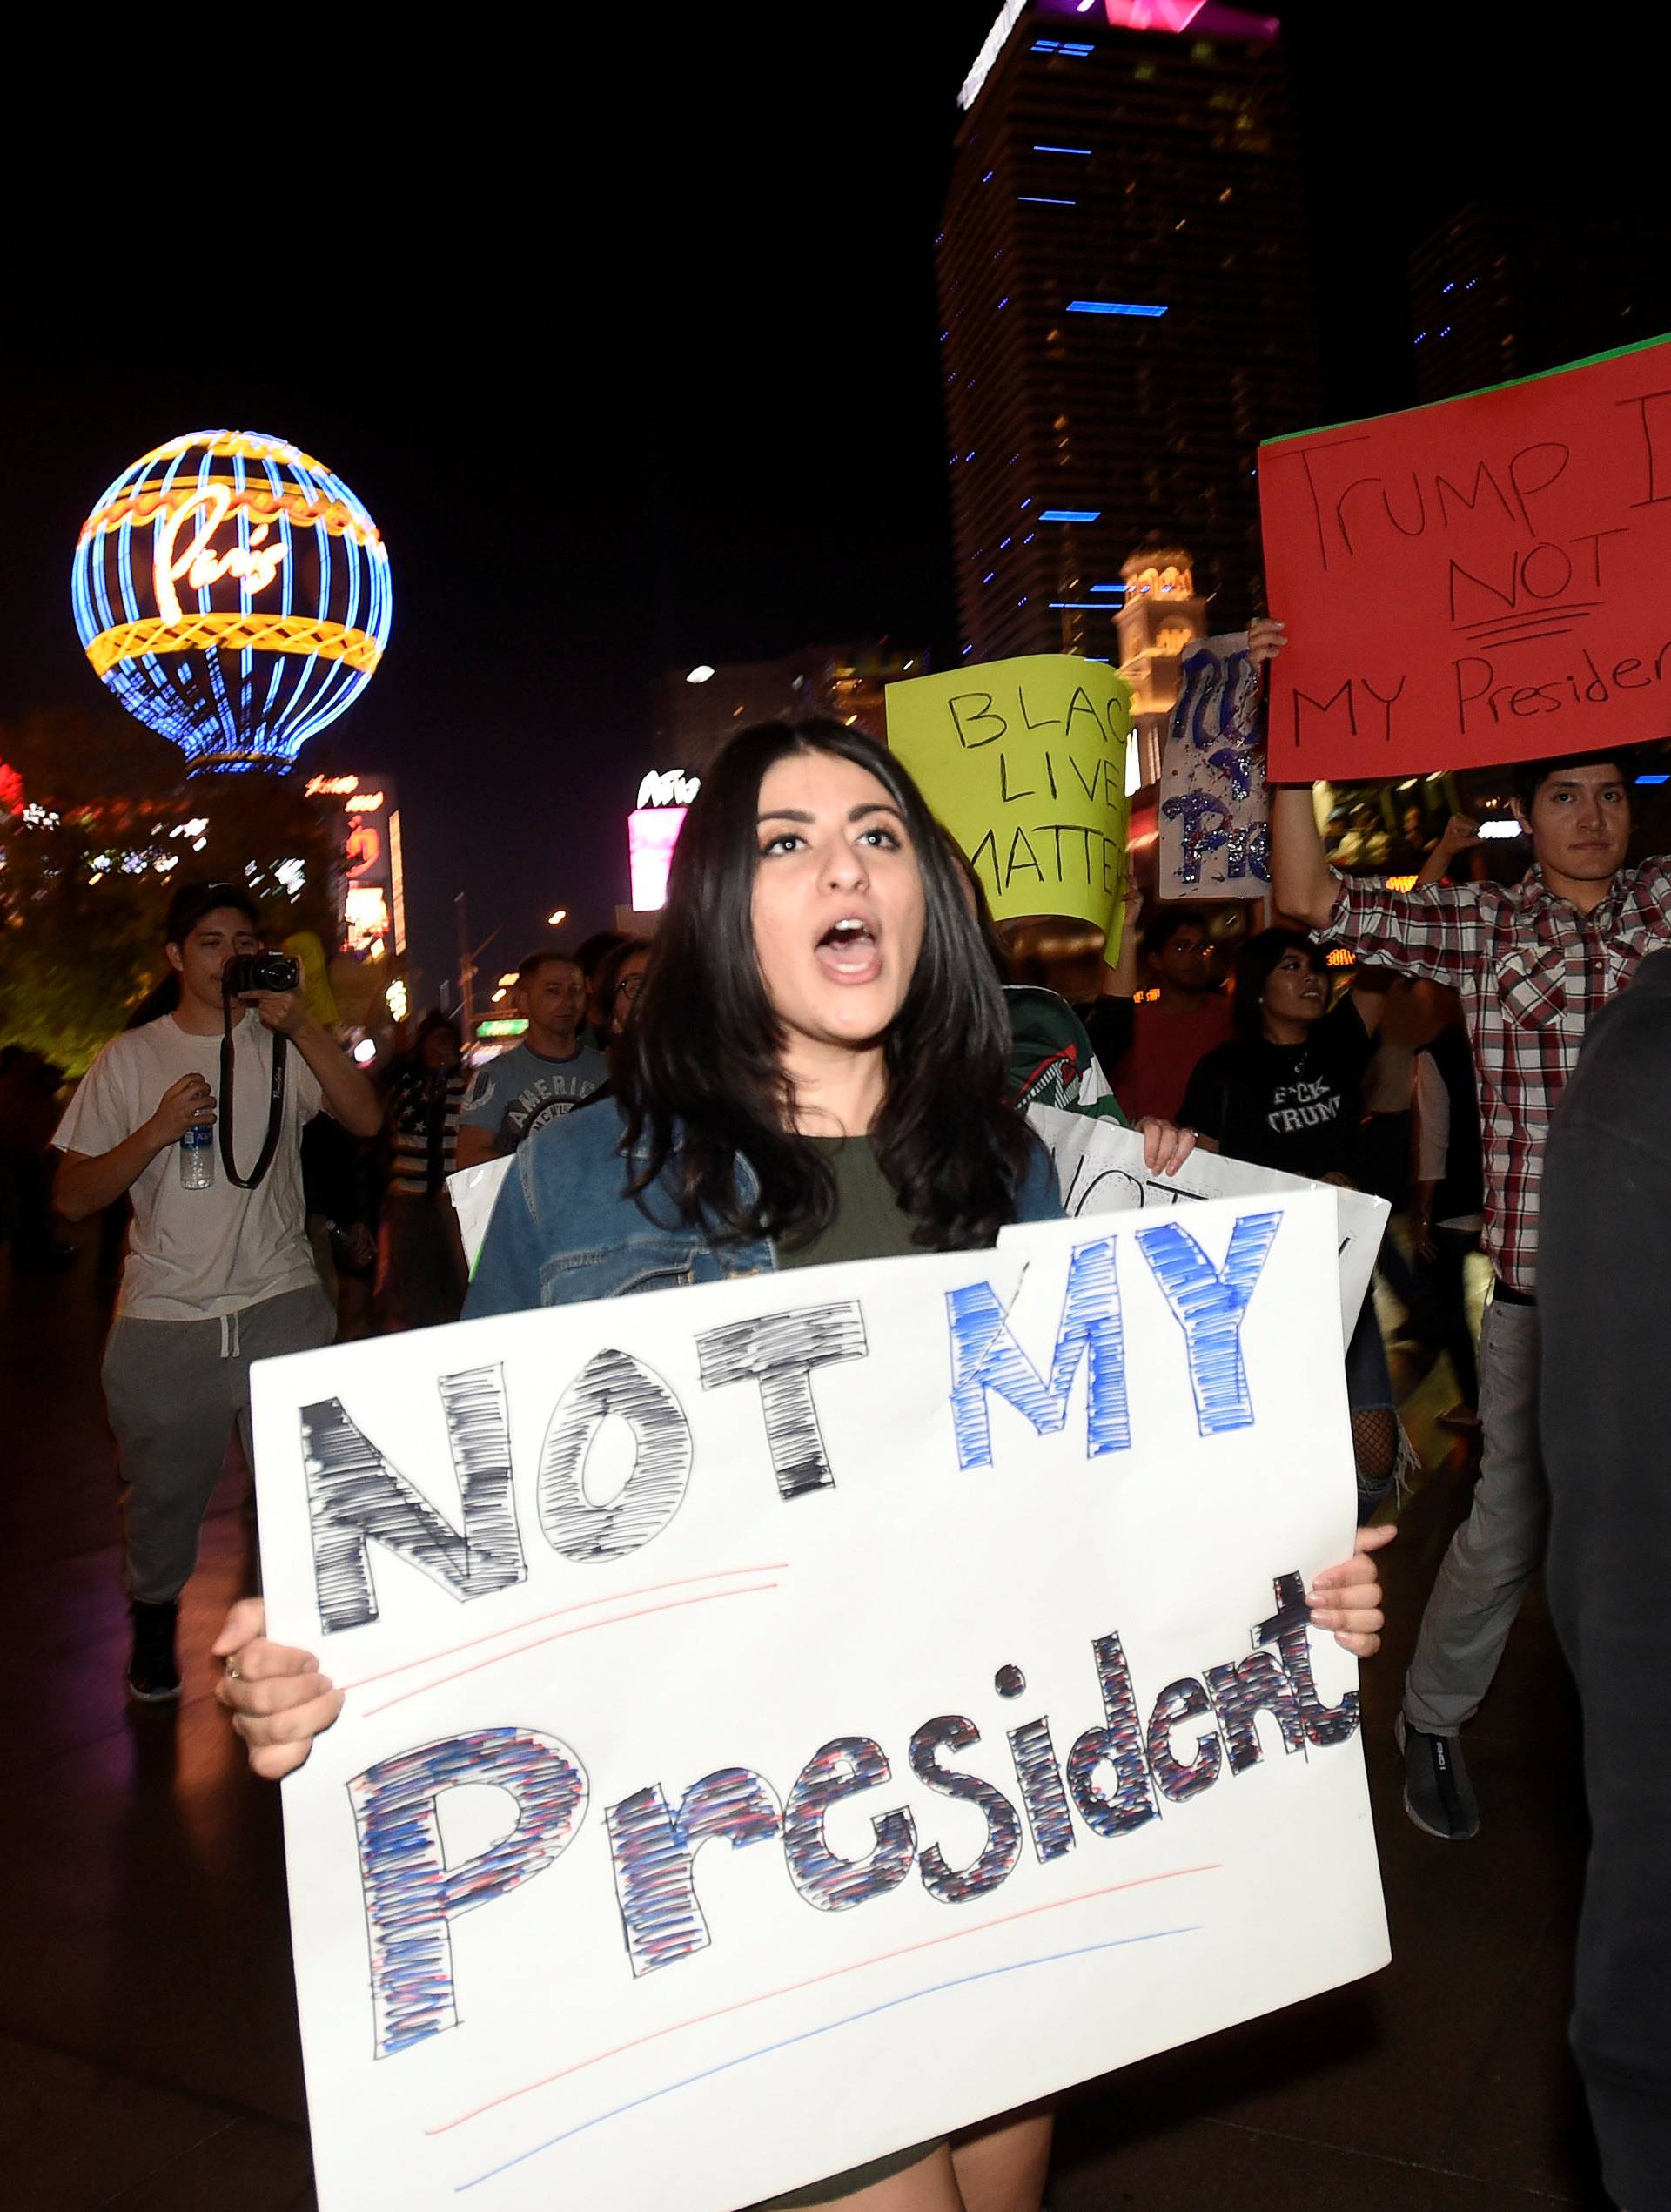 Demonstrators chant during a protest march against the election of Republican Donald Trump as President of the United States, along the Las Vegas Strip in Las Vegas